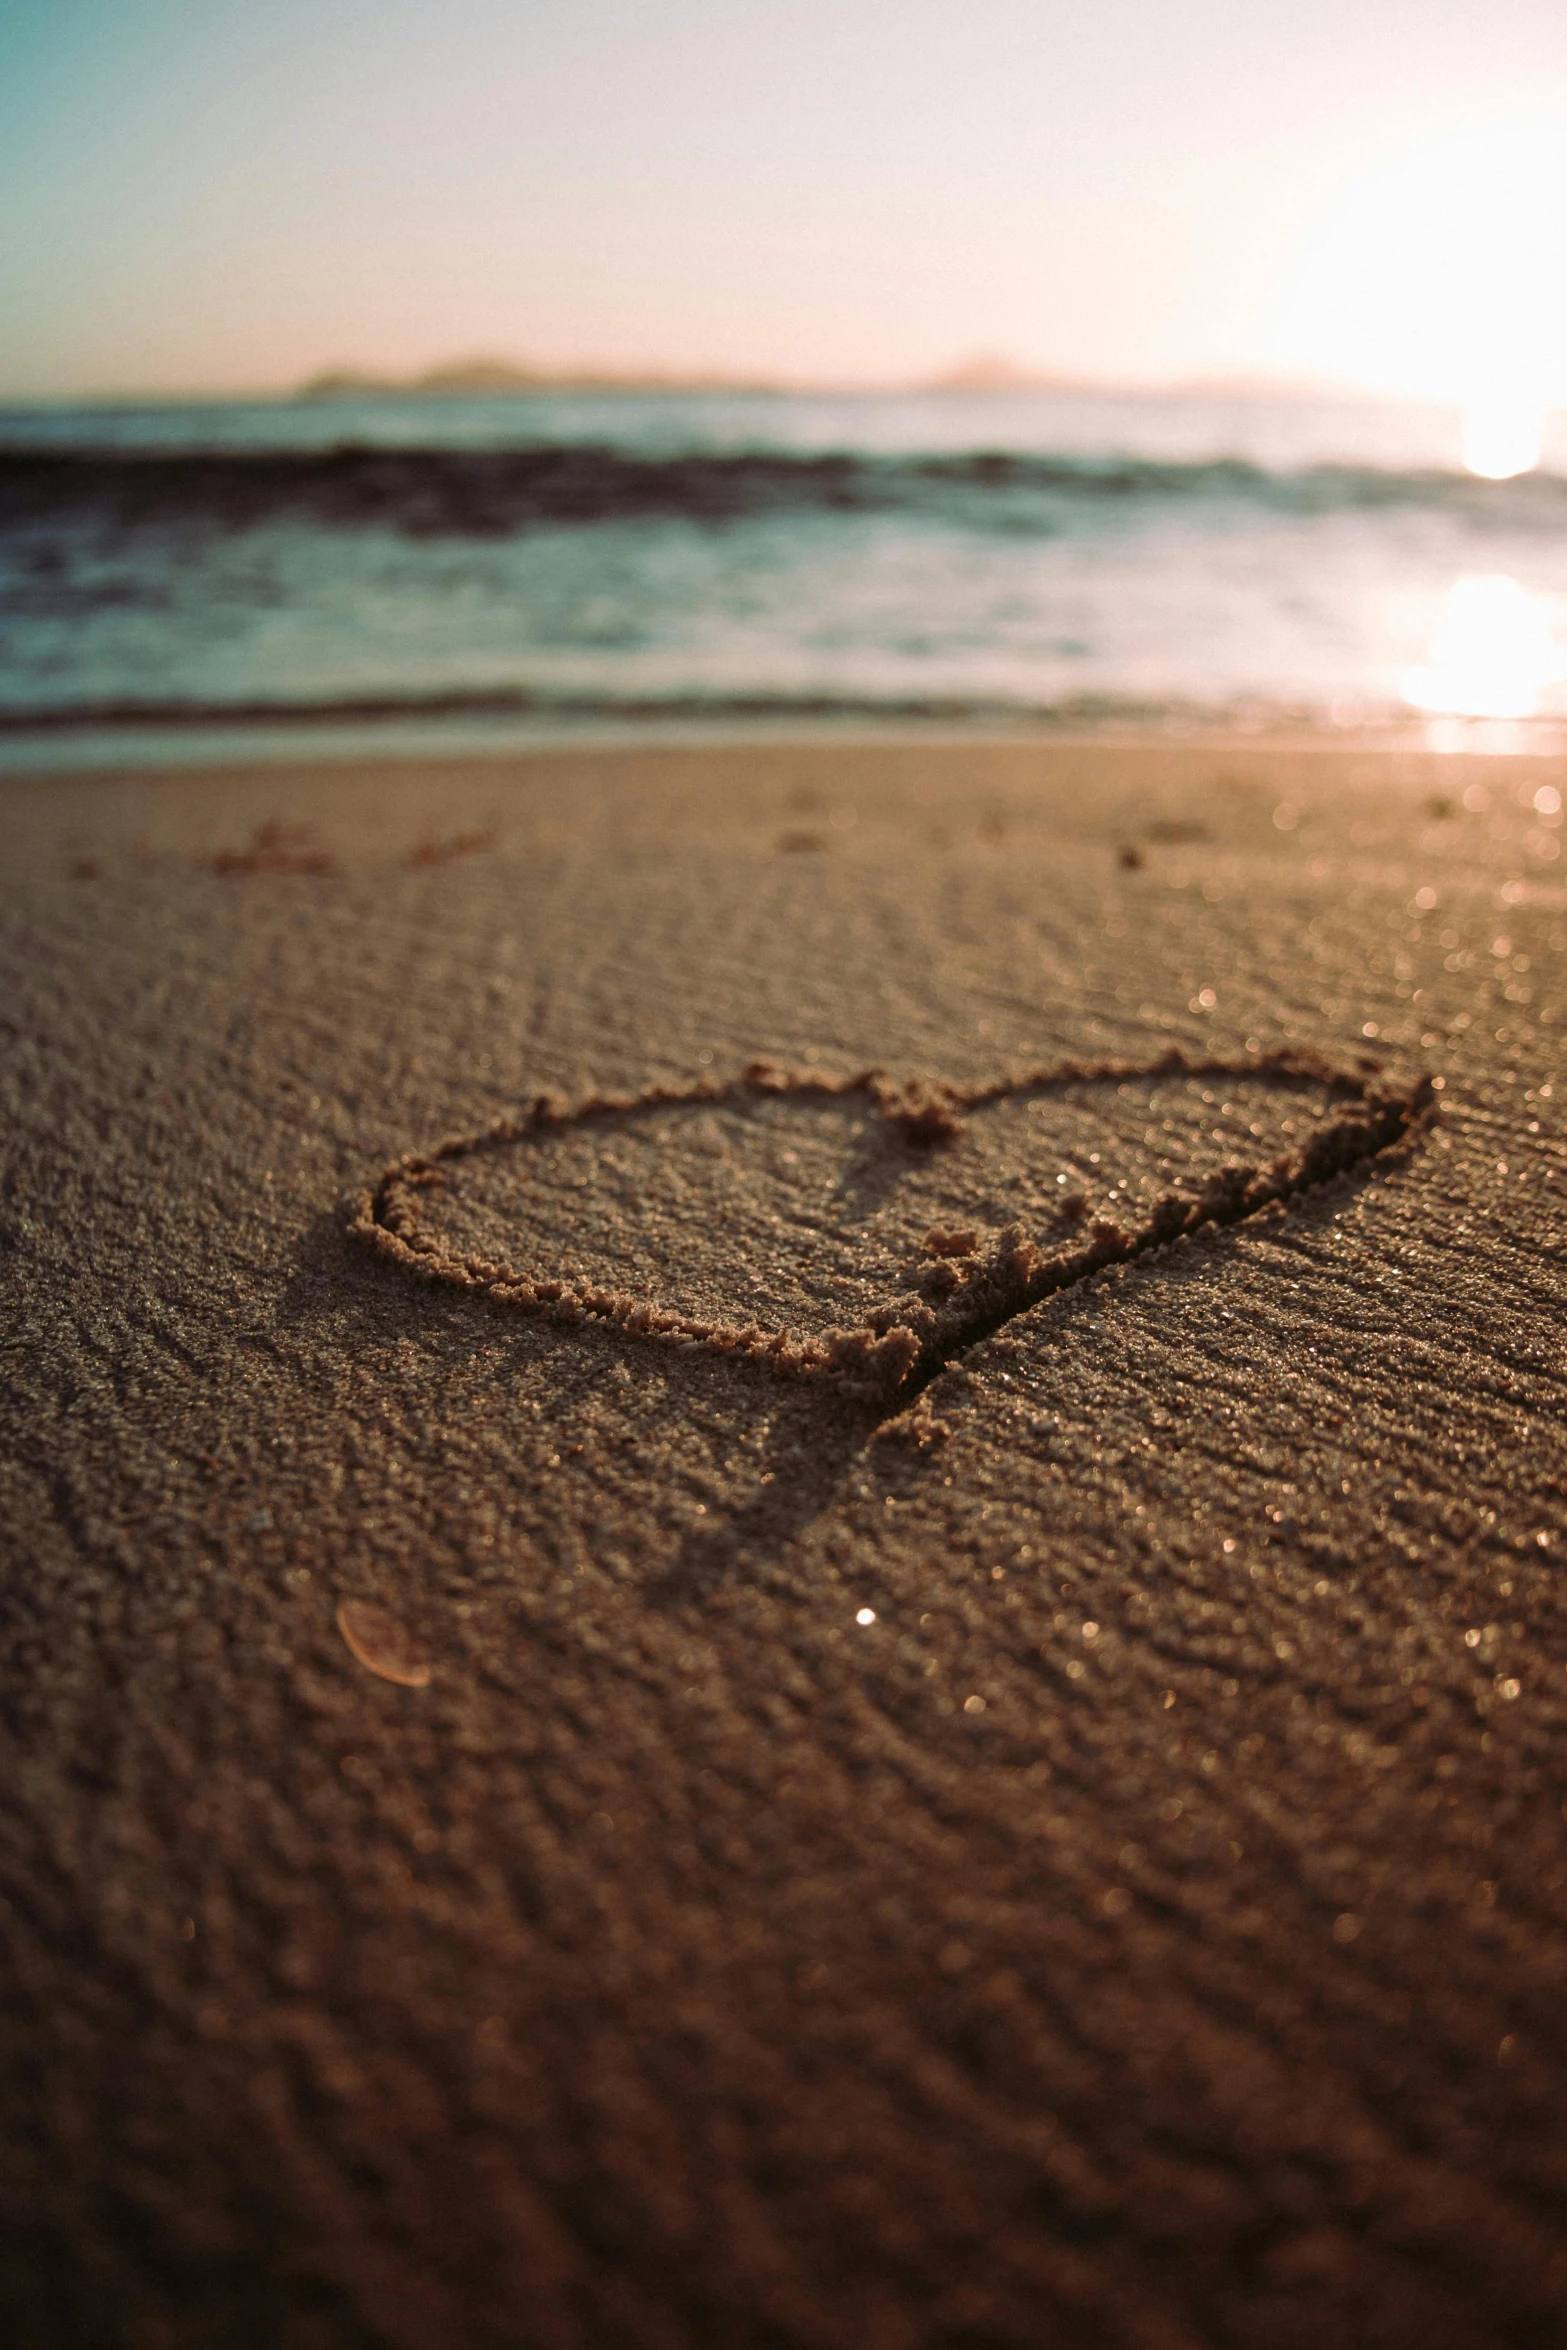 a heart drawn in the sand on a beach, an album cover, unsplash, paul barson, vacation, evening sunlight, ox